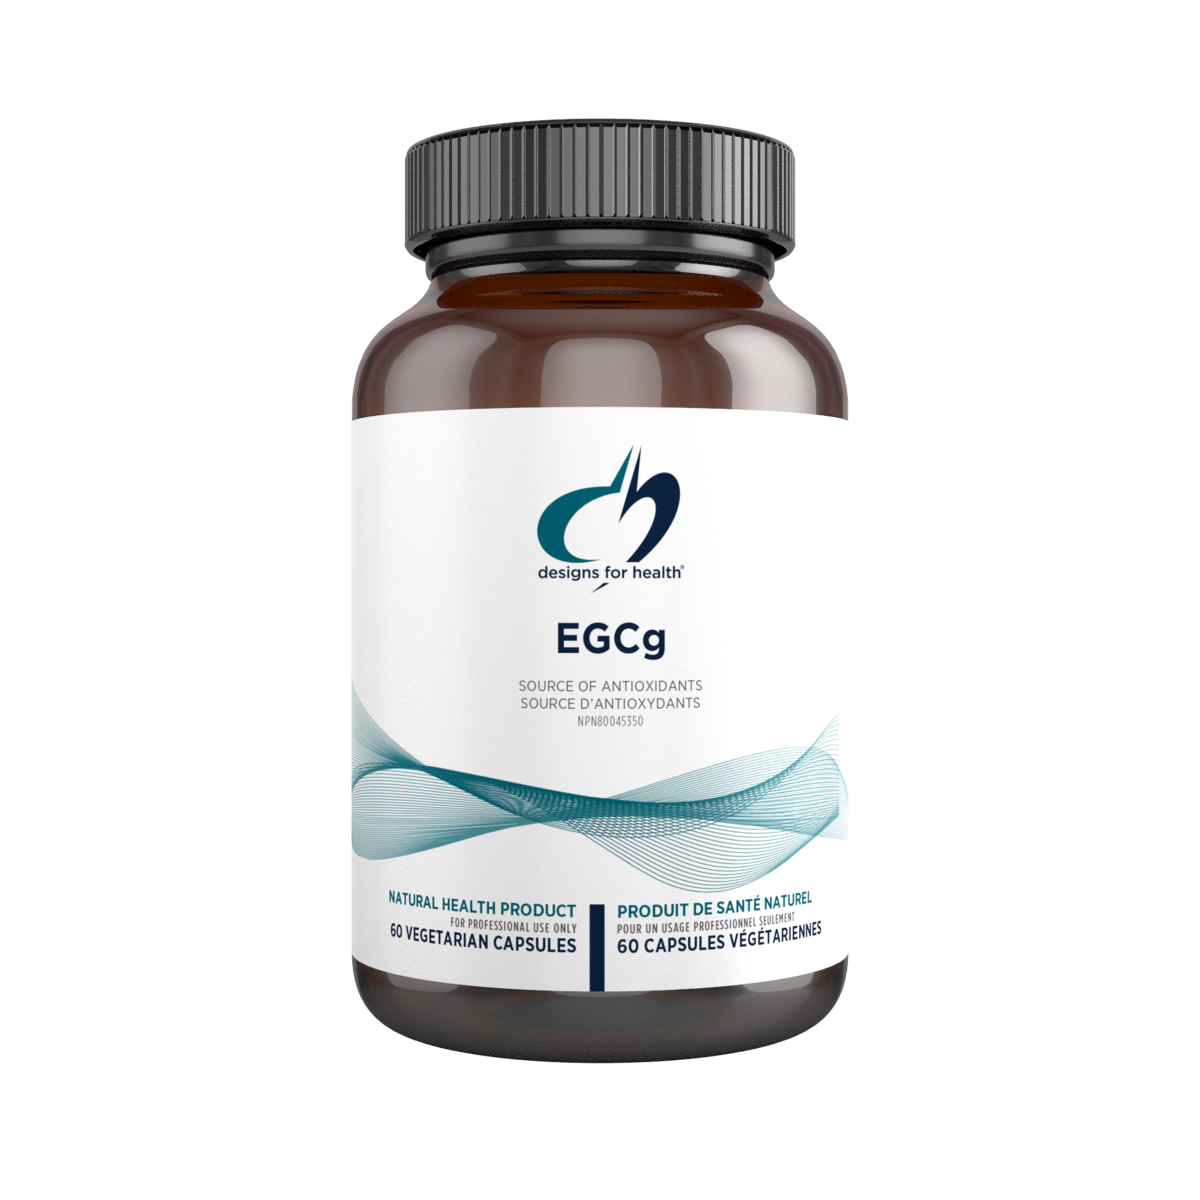 EGCG and oral health